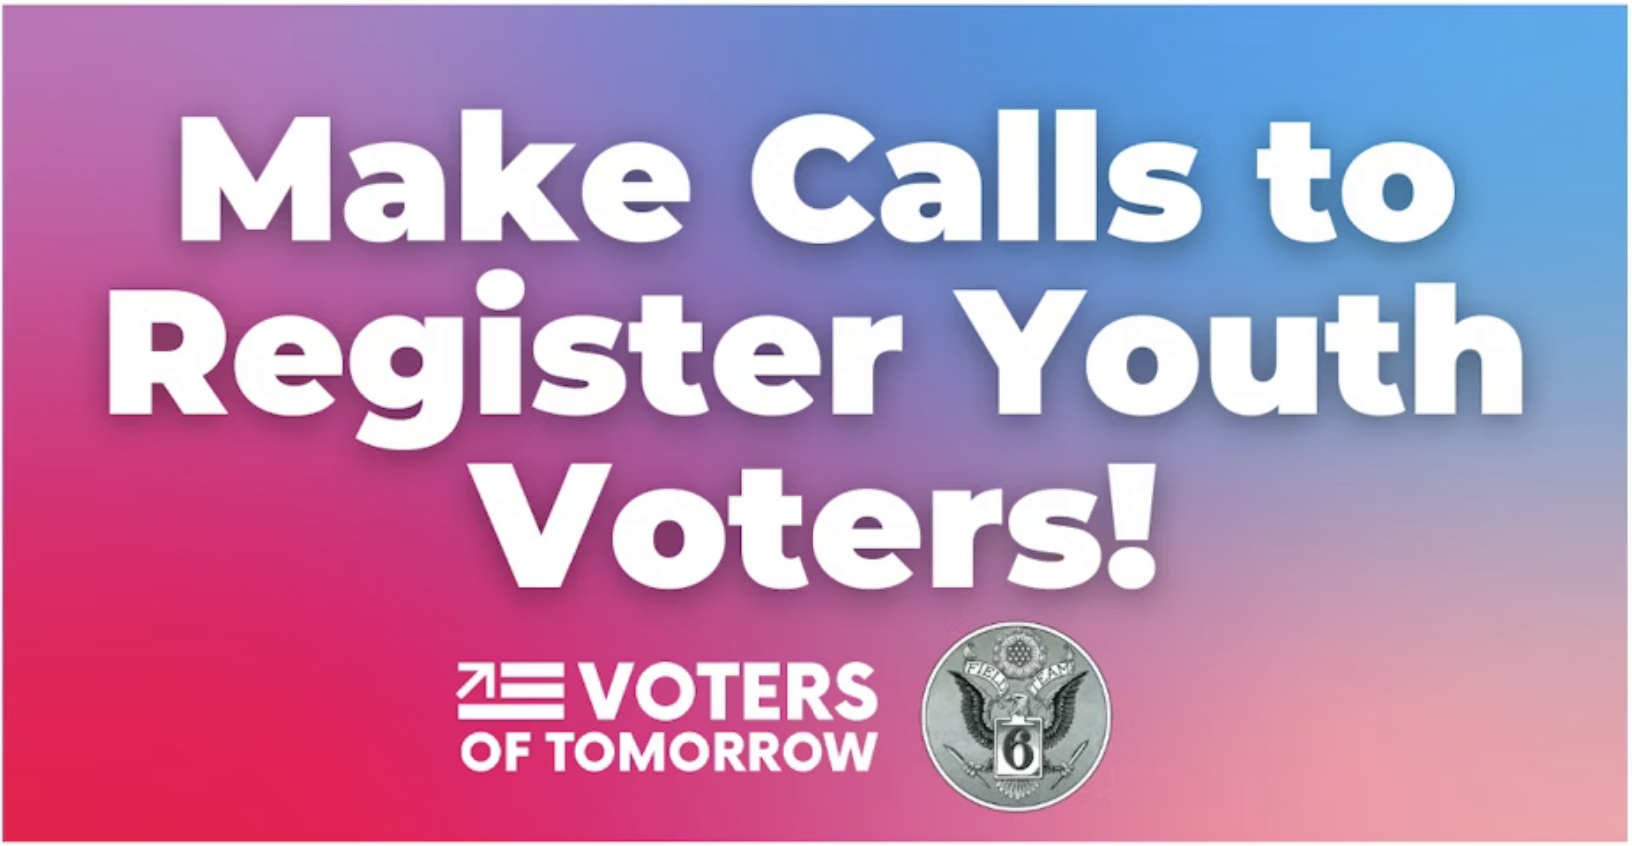 Make calls to register youth voters!